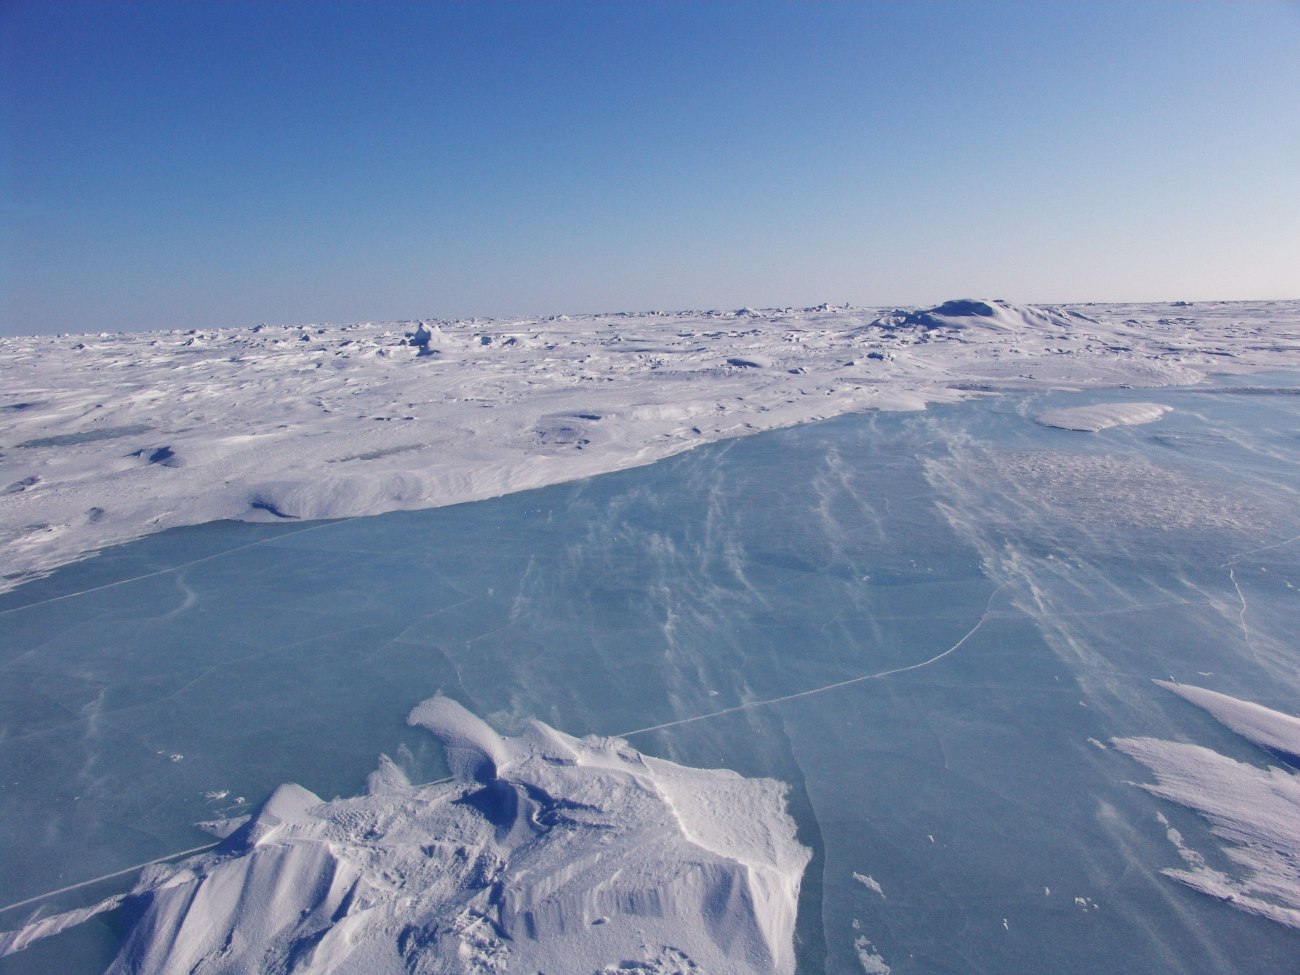 Looking over a frozen melt pond towards a hummocky ice landscape in multi-year ice